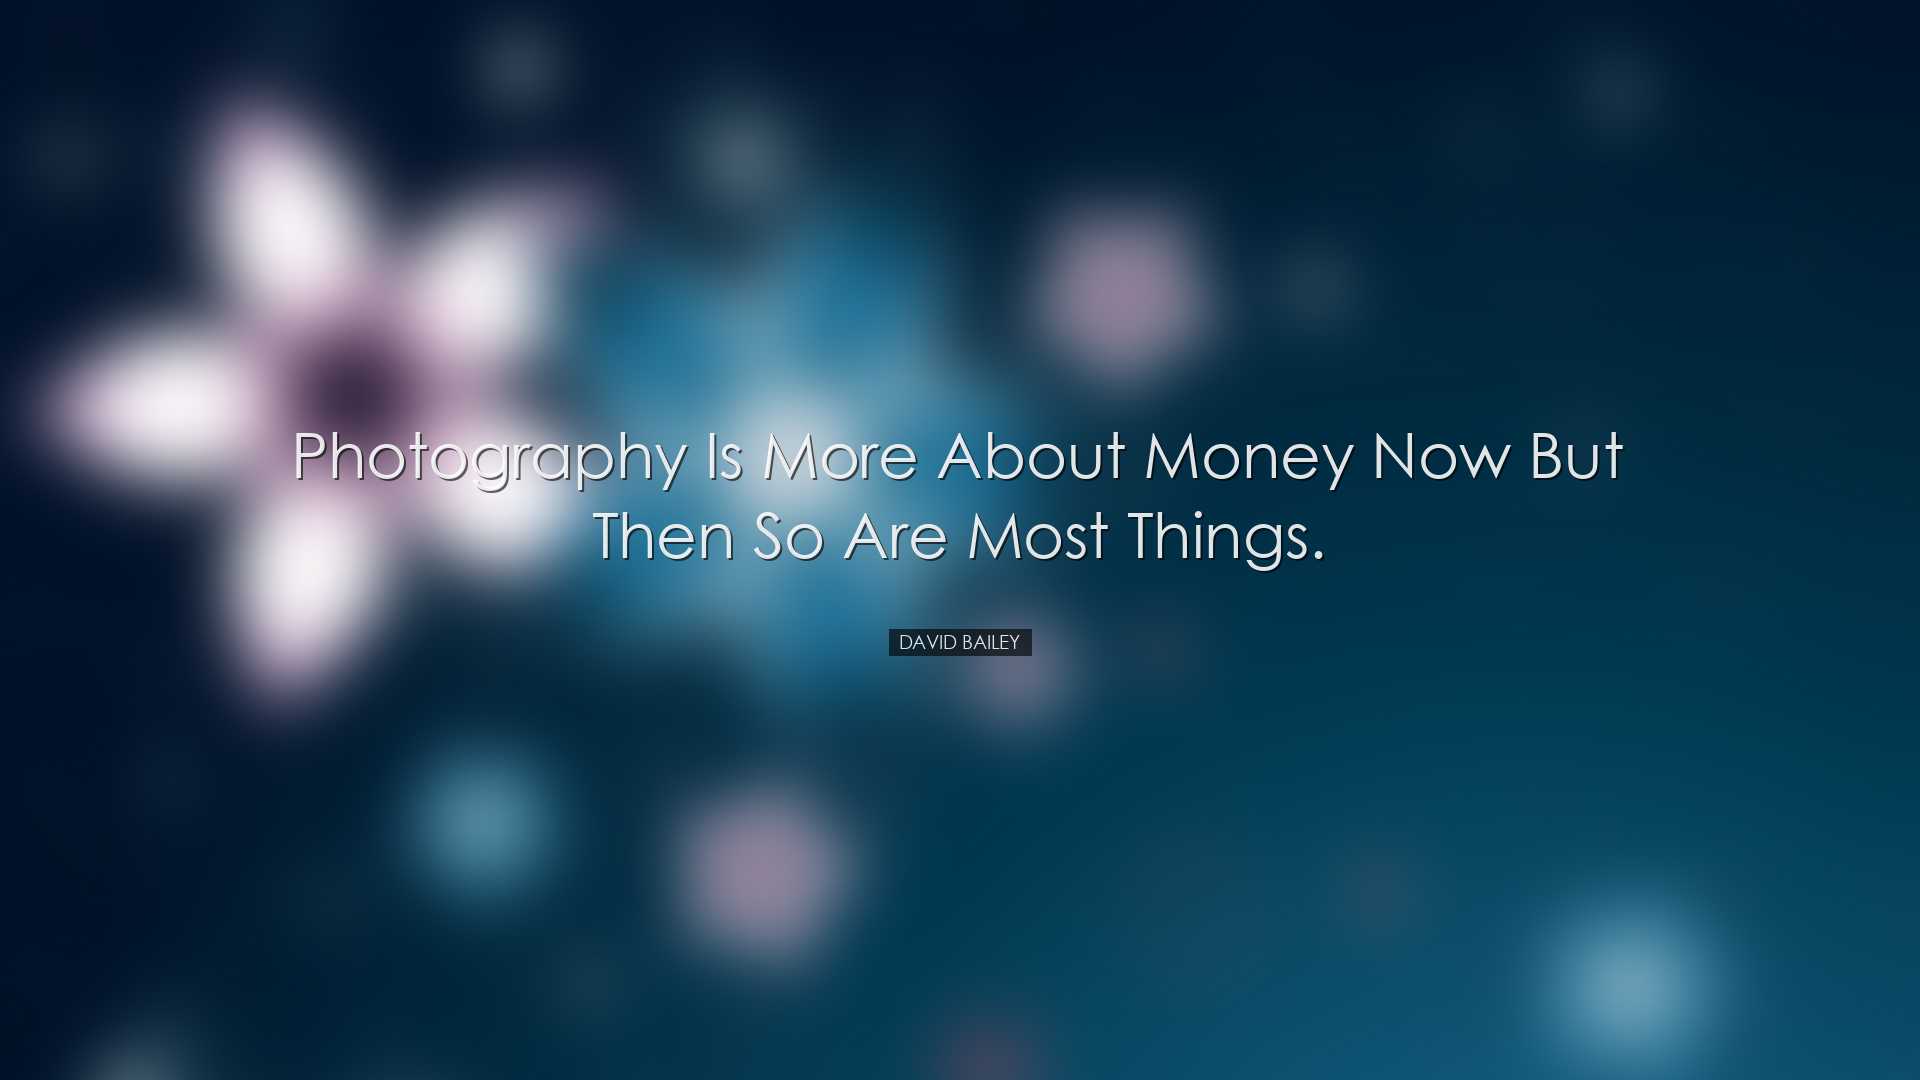 Photography is more about money now but then so are most things. -